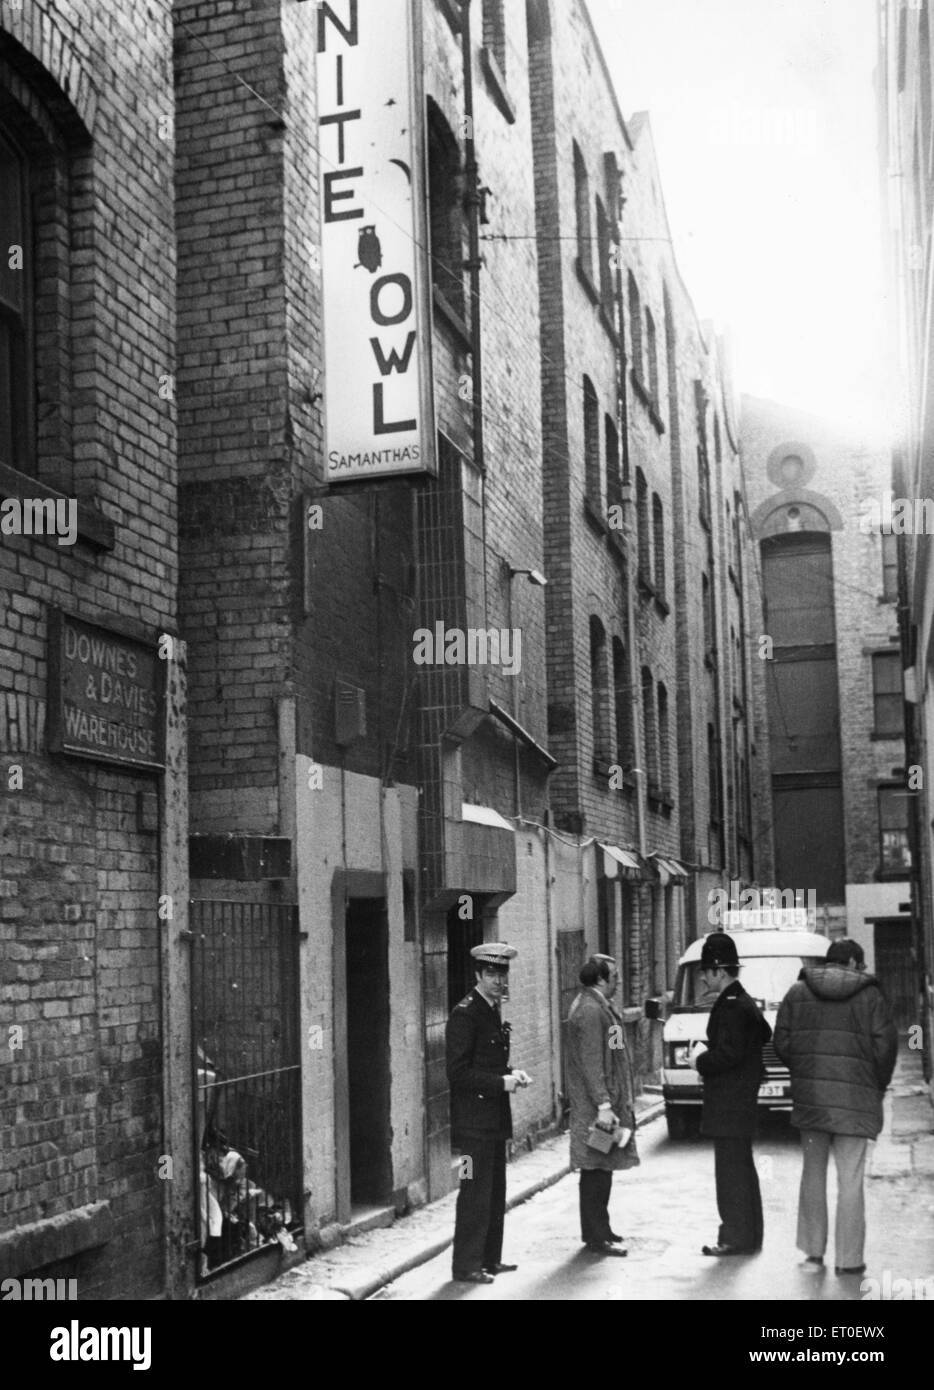 Police outside the Nite Owl Club in Davies Street the morning after a fierce fight at the club left one man in hospital fighting for his life. 16th November 1981 Stock Photo